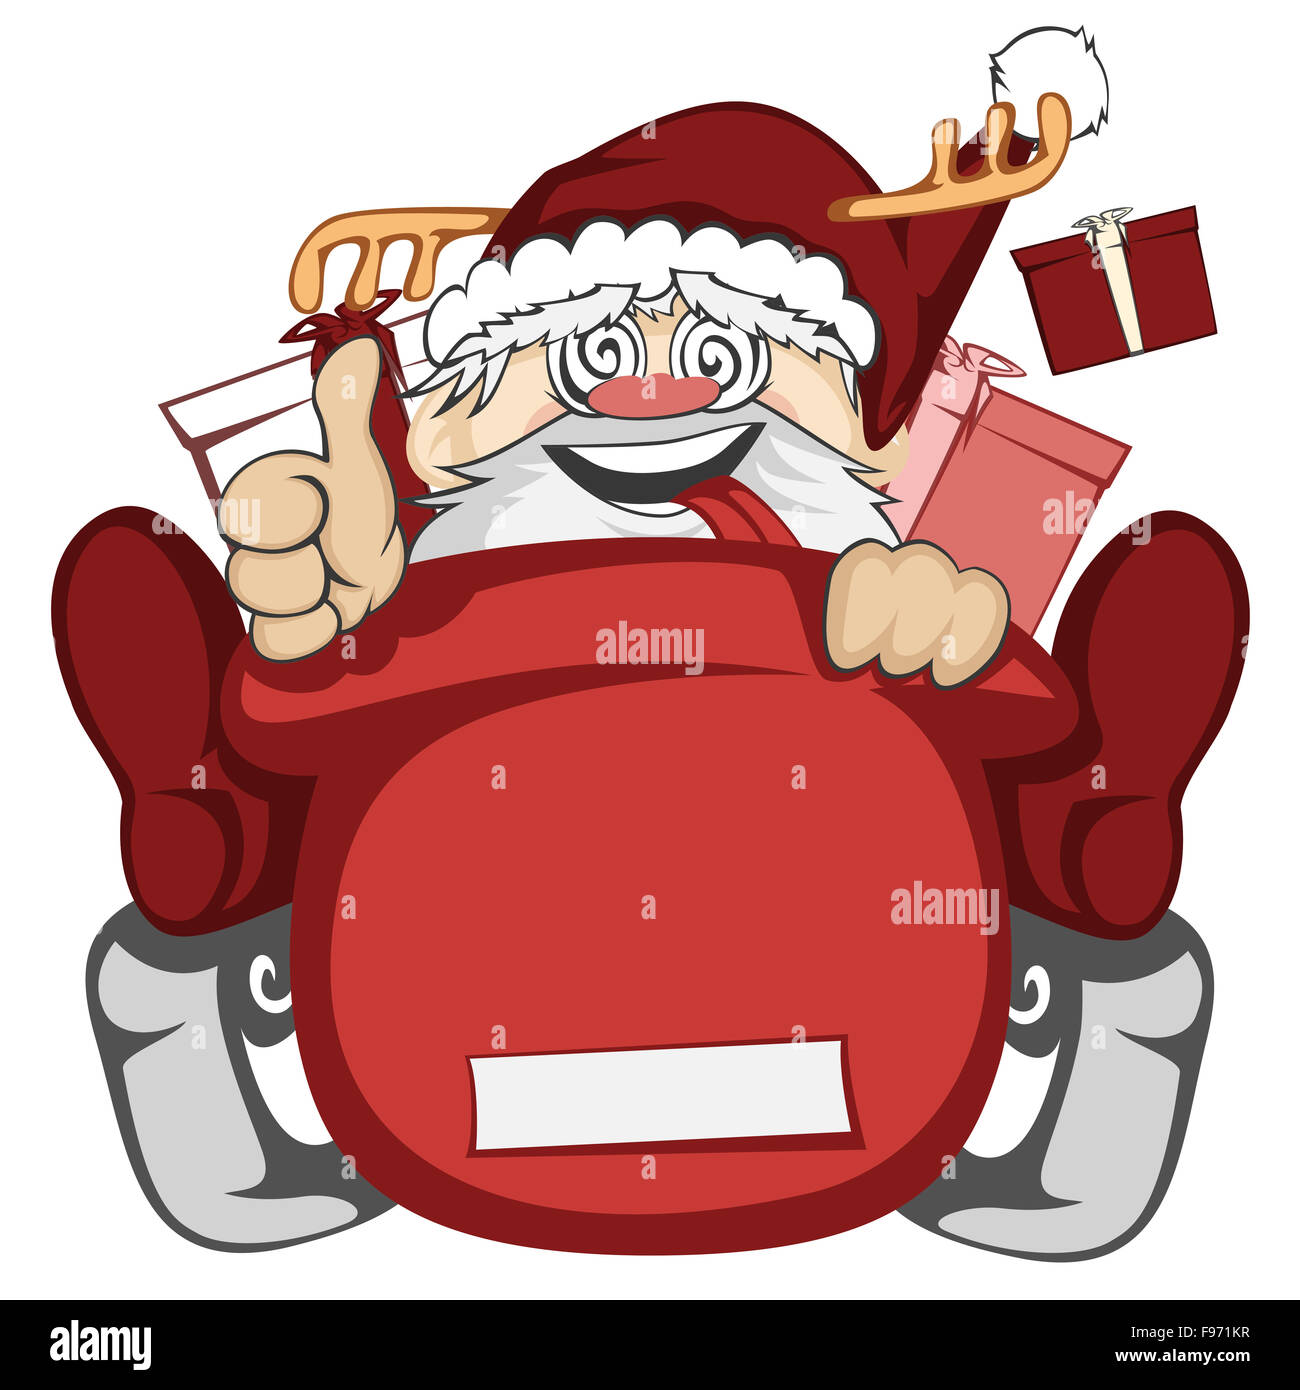 Santa Claus in action - Santa sleigh is out of control (crazy Santa with deer antler) Stock Photo